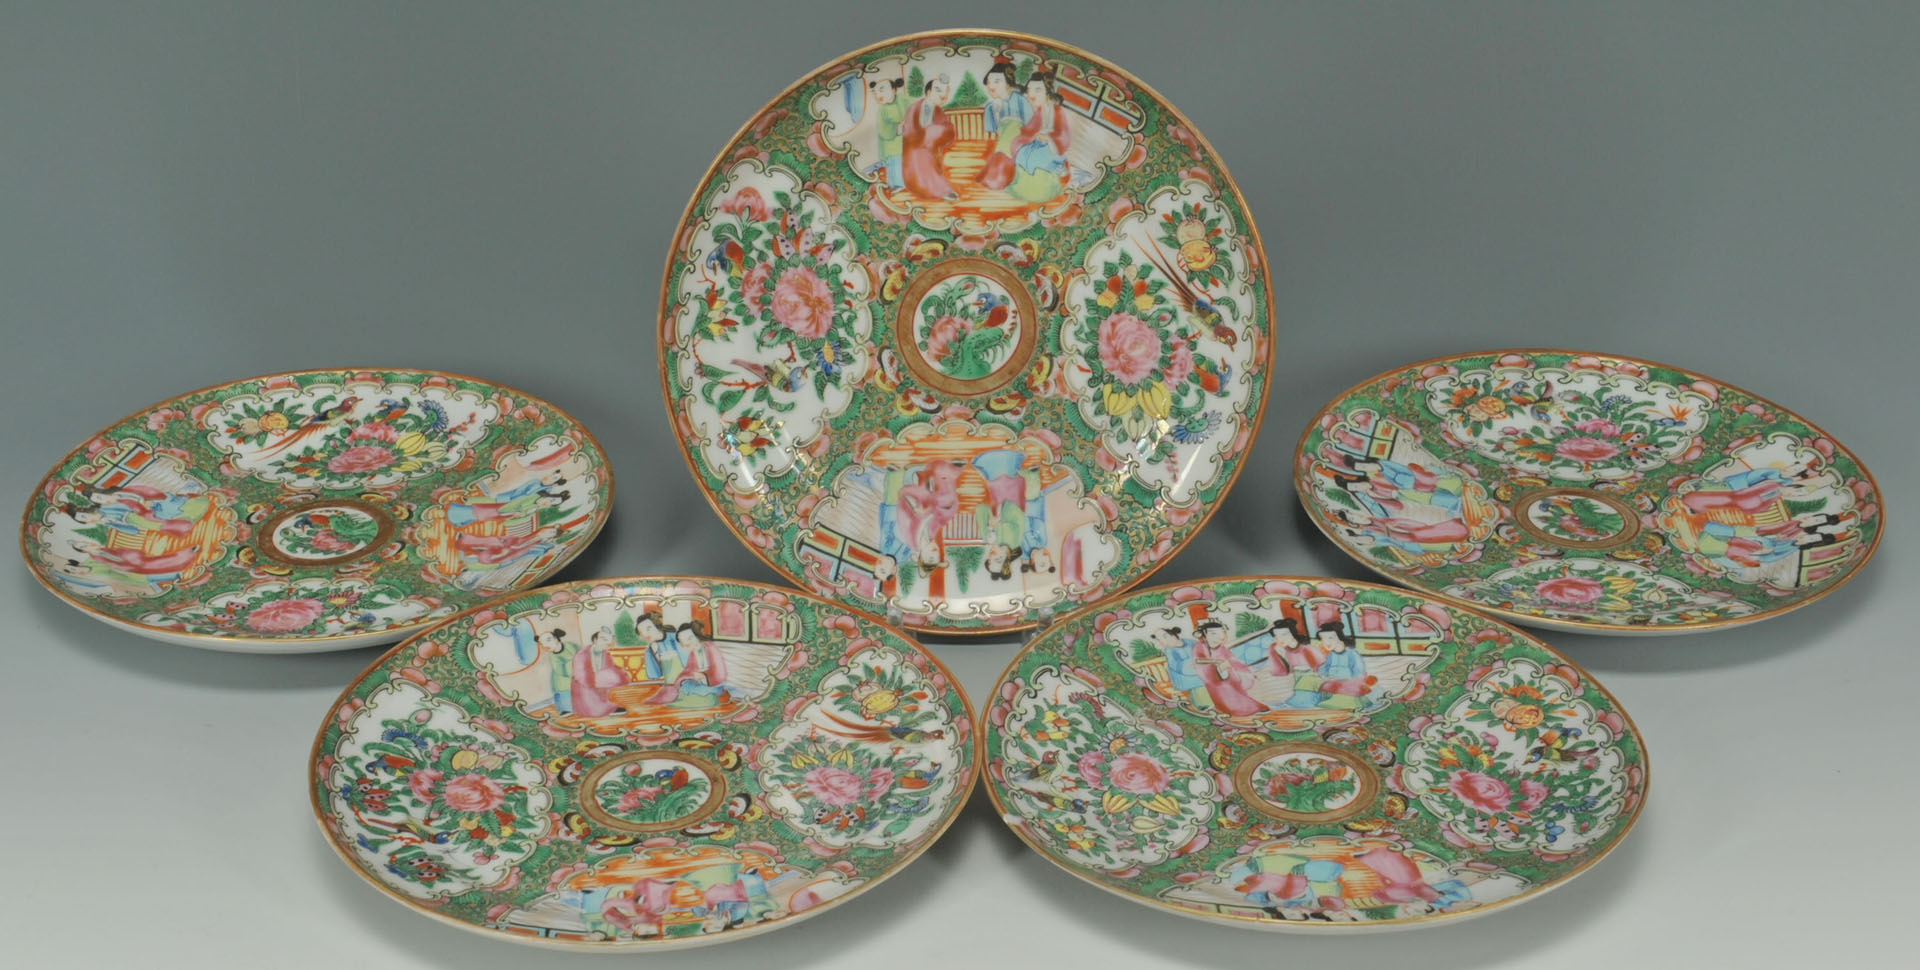 Lot 481: Group of Chinese Rose Medallion Porcelain